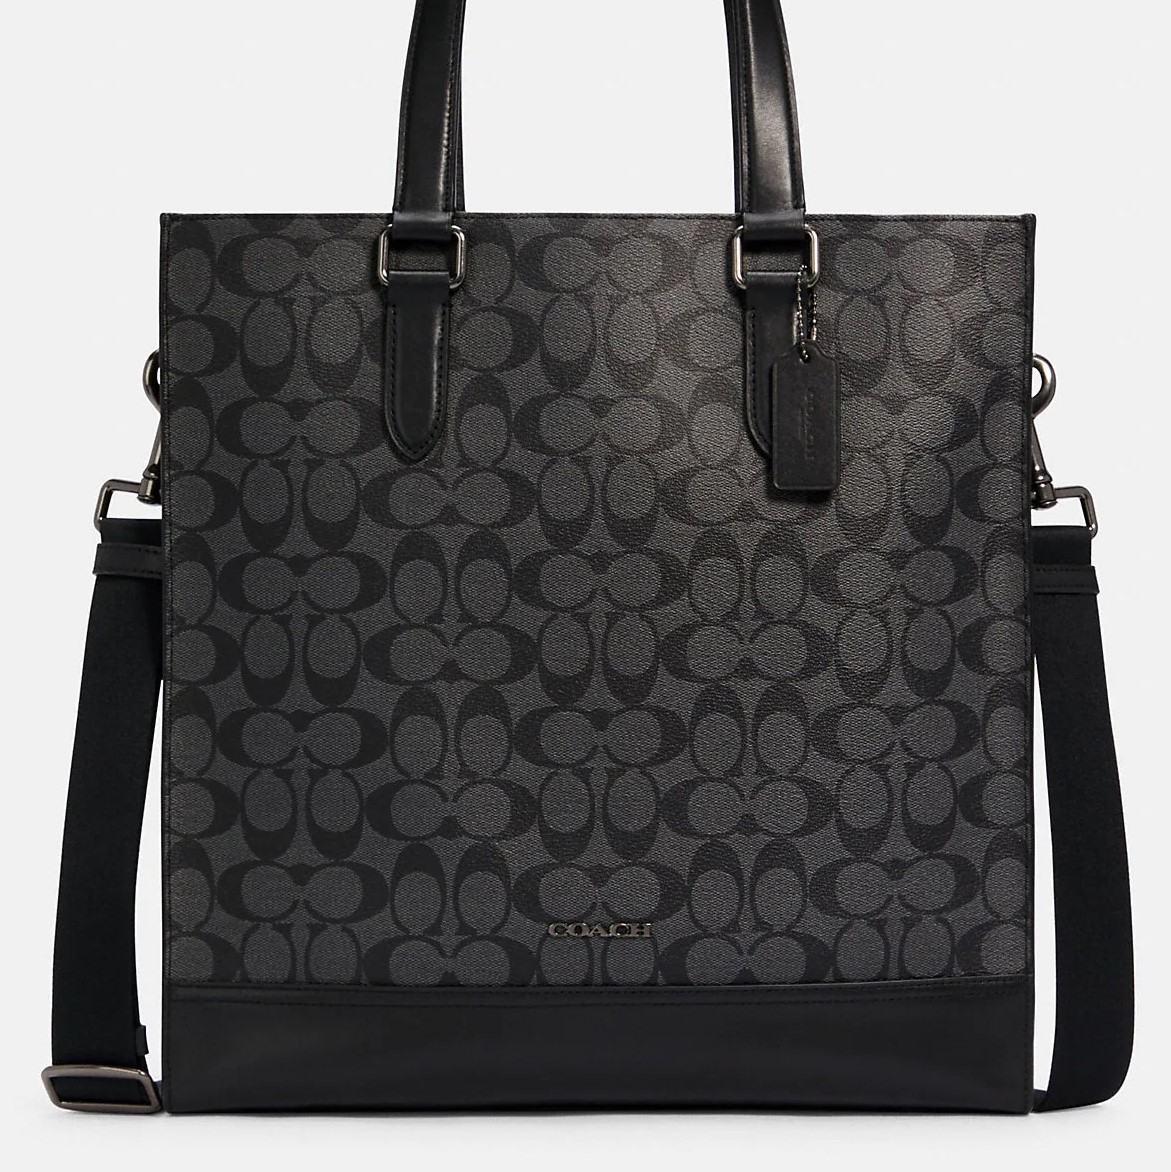 TÚI TOTE SIZE LỚN HỌA TIẾT COACH GRAHAM STRUCTURED TOTE IN GUNMETAL CHARCOAL BLACK SIGNATURE CANVAS C3232 5